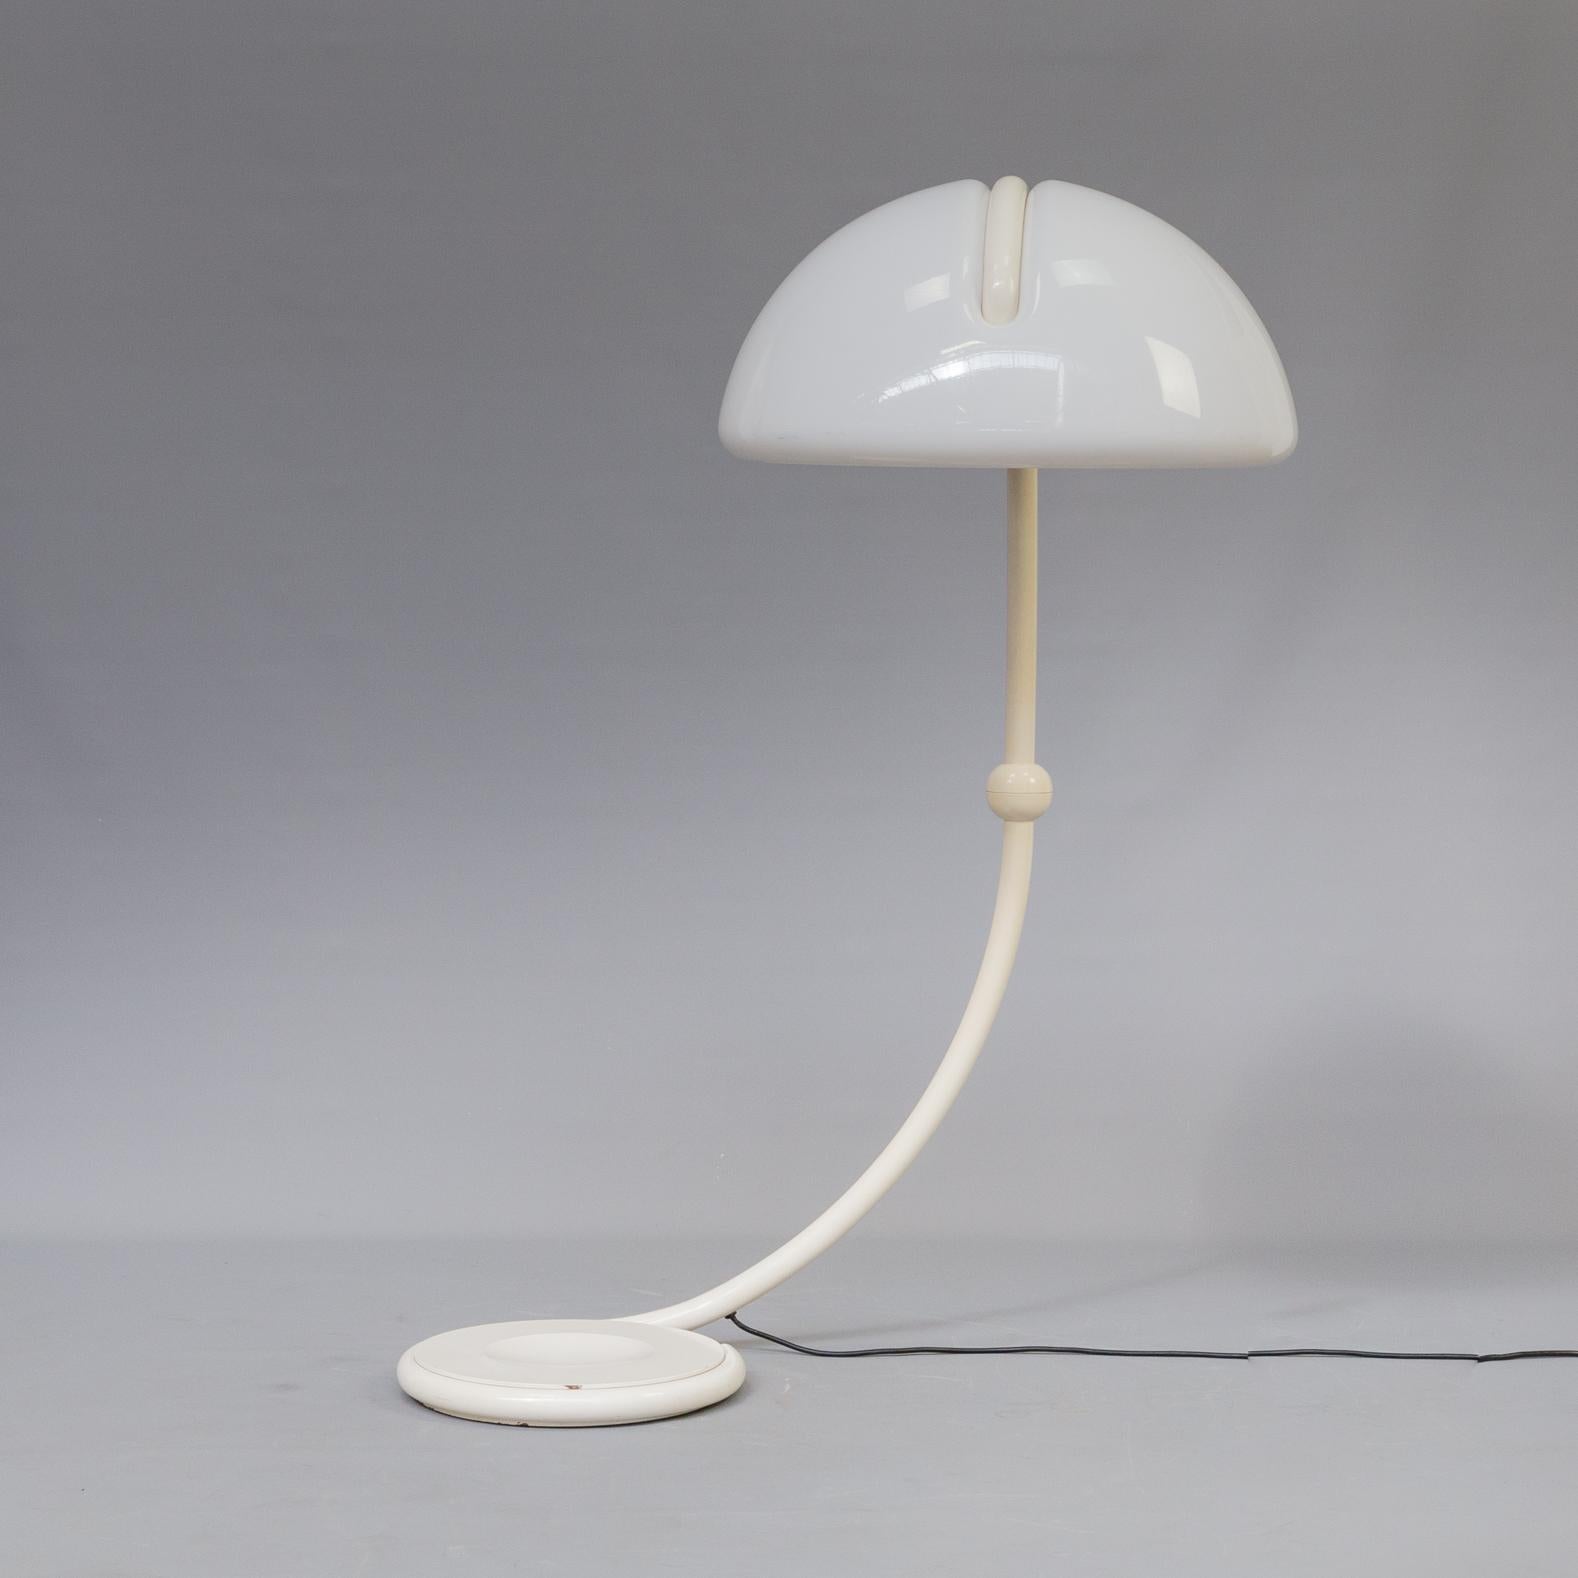 Mid-20th Century Elio Martinelli “Serpente” Floorlamp for Martinelli Luce Italy For Sale